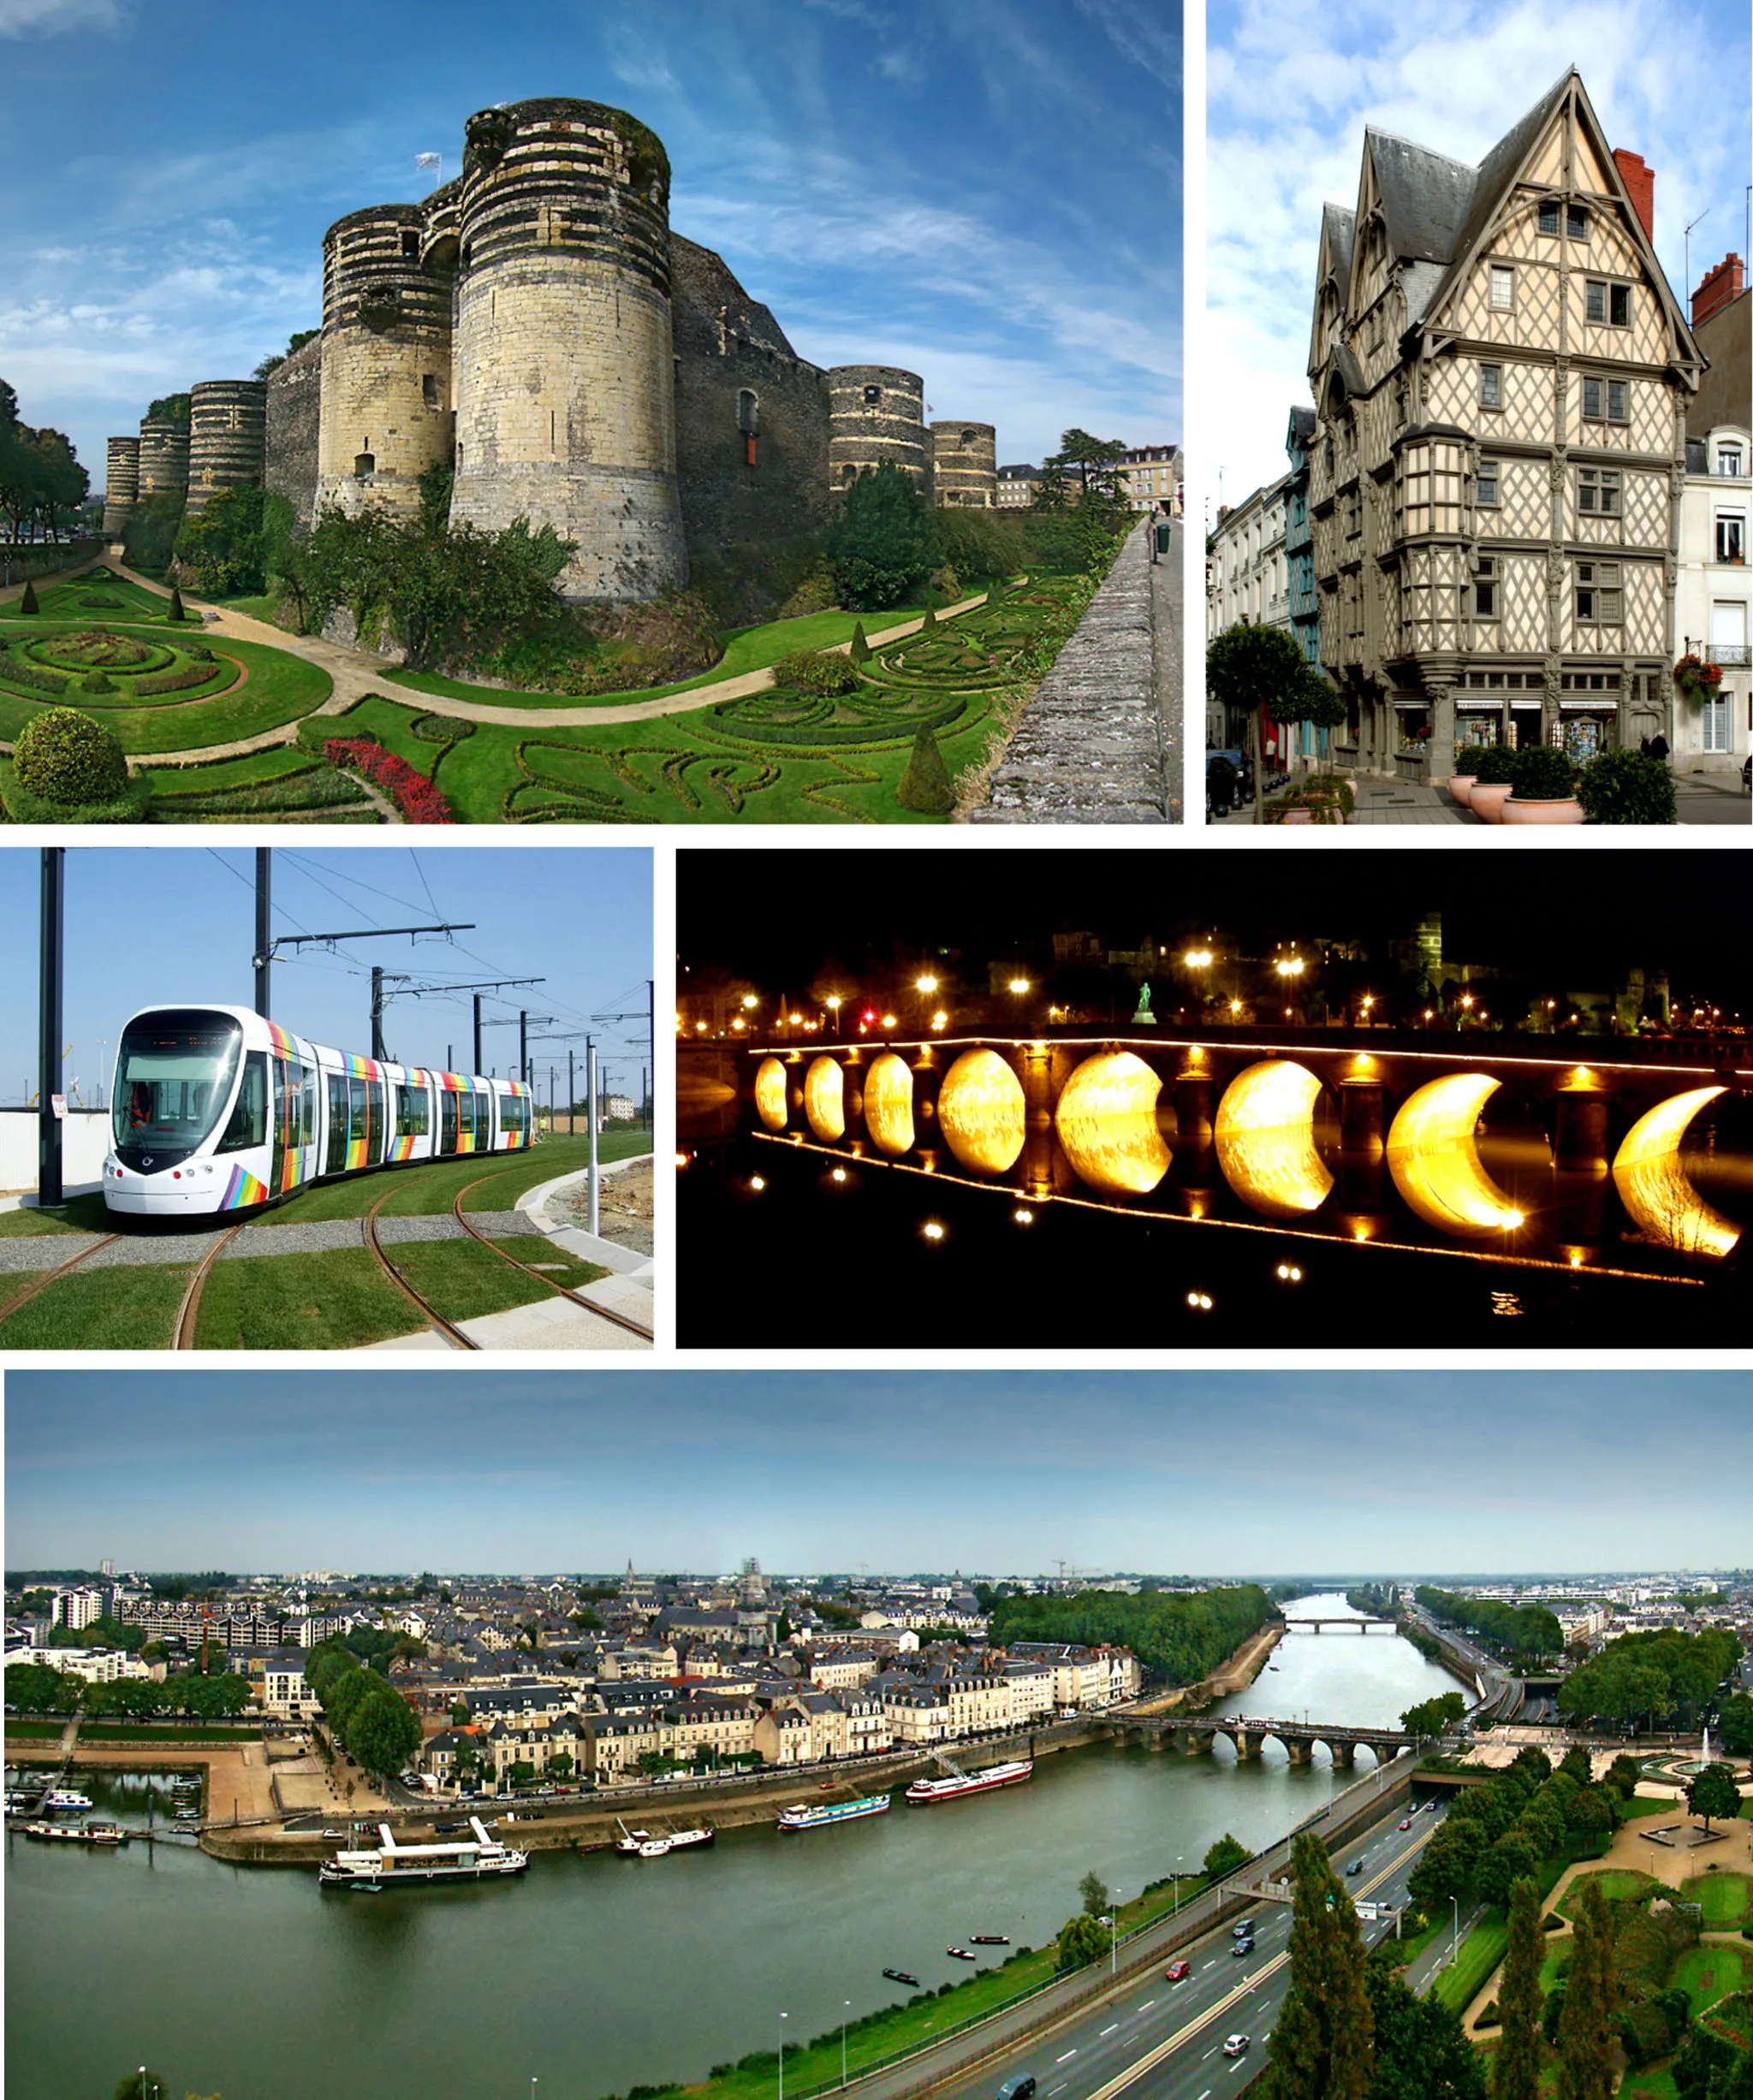 Photo showing: Various views of Angers, France.
Top to bottom, clockwise:

The castle, the "Maison d'Adam", the "pont de Verdun" by night, panorama of the Maine seen from the castle, a tram.